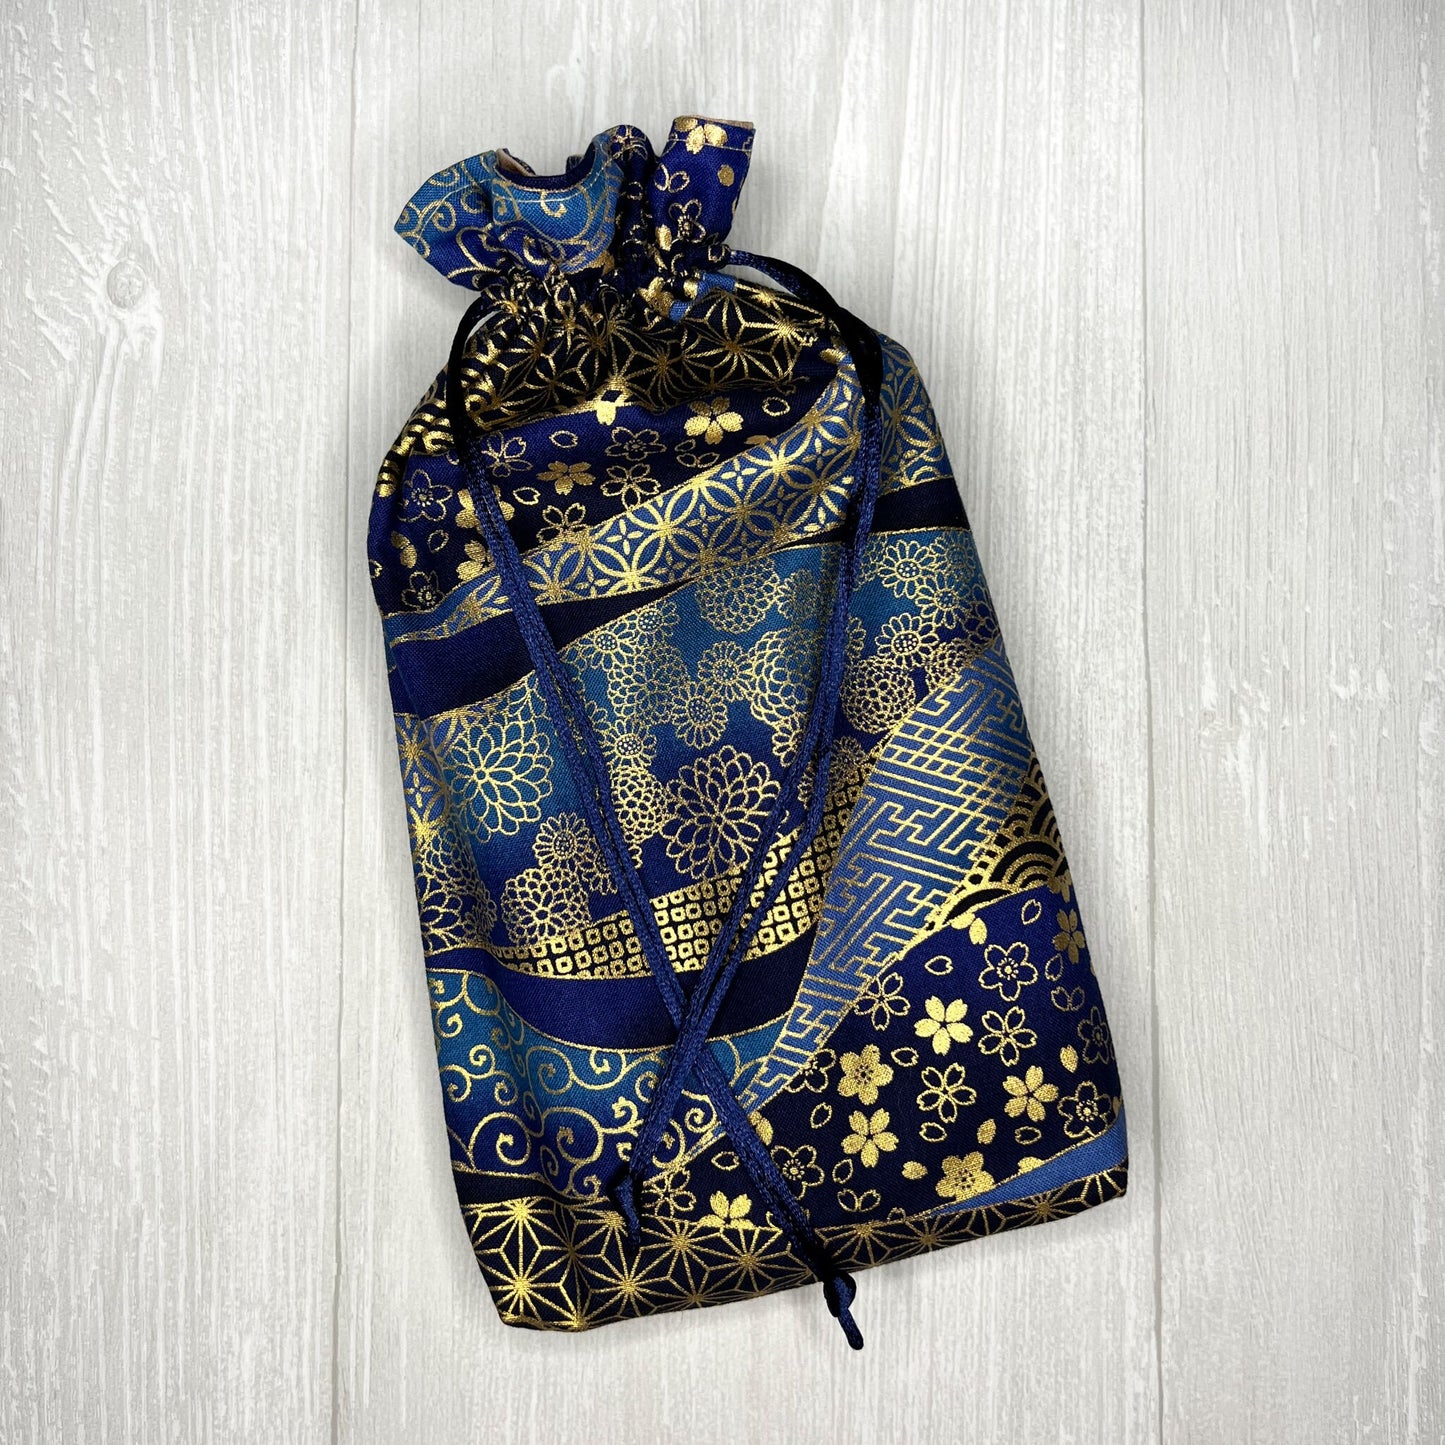 Large Blue & Gold Tarot Deck Bag, Blue Oracle Card Drawstring Pouch, Deck Storage Holder, Pagan Witchcraft Divination Tools and Supplies